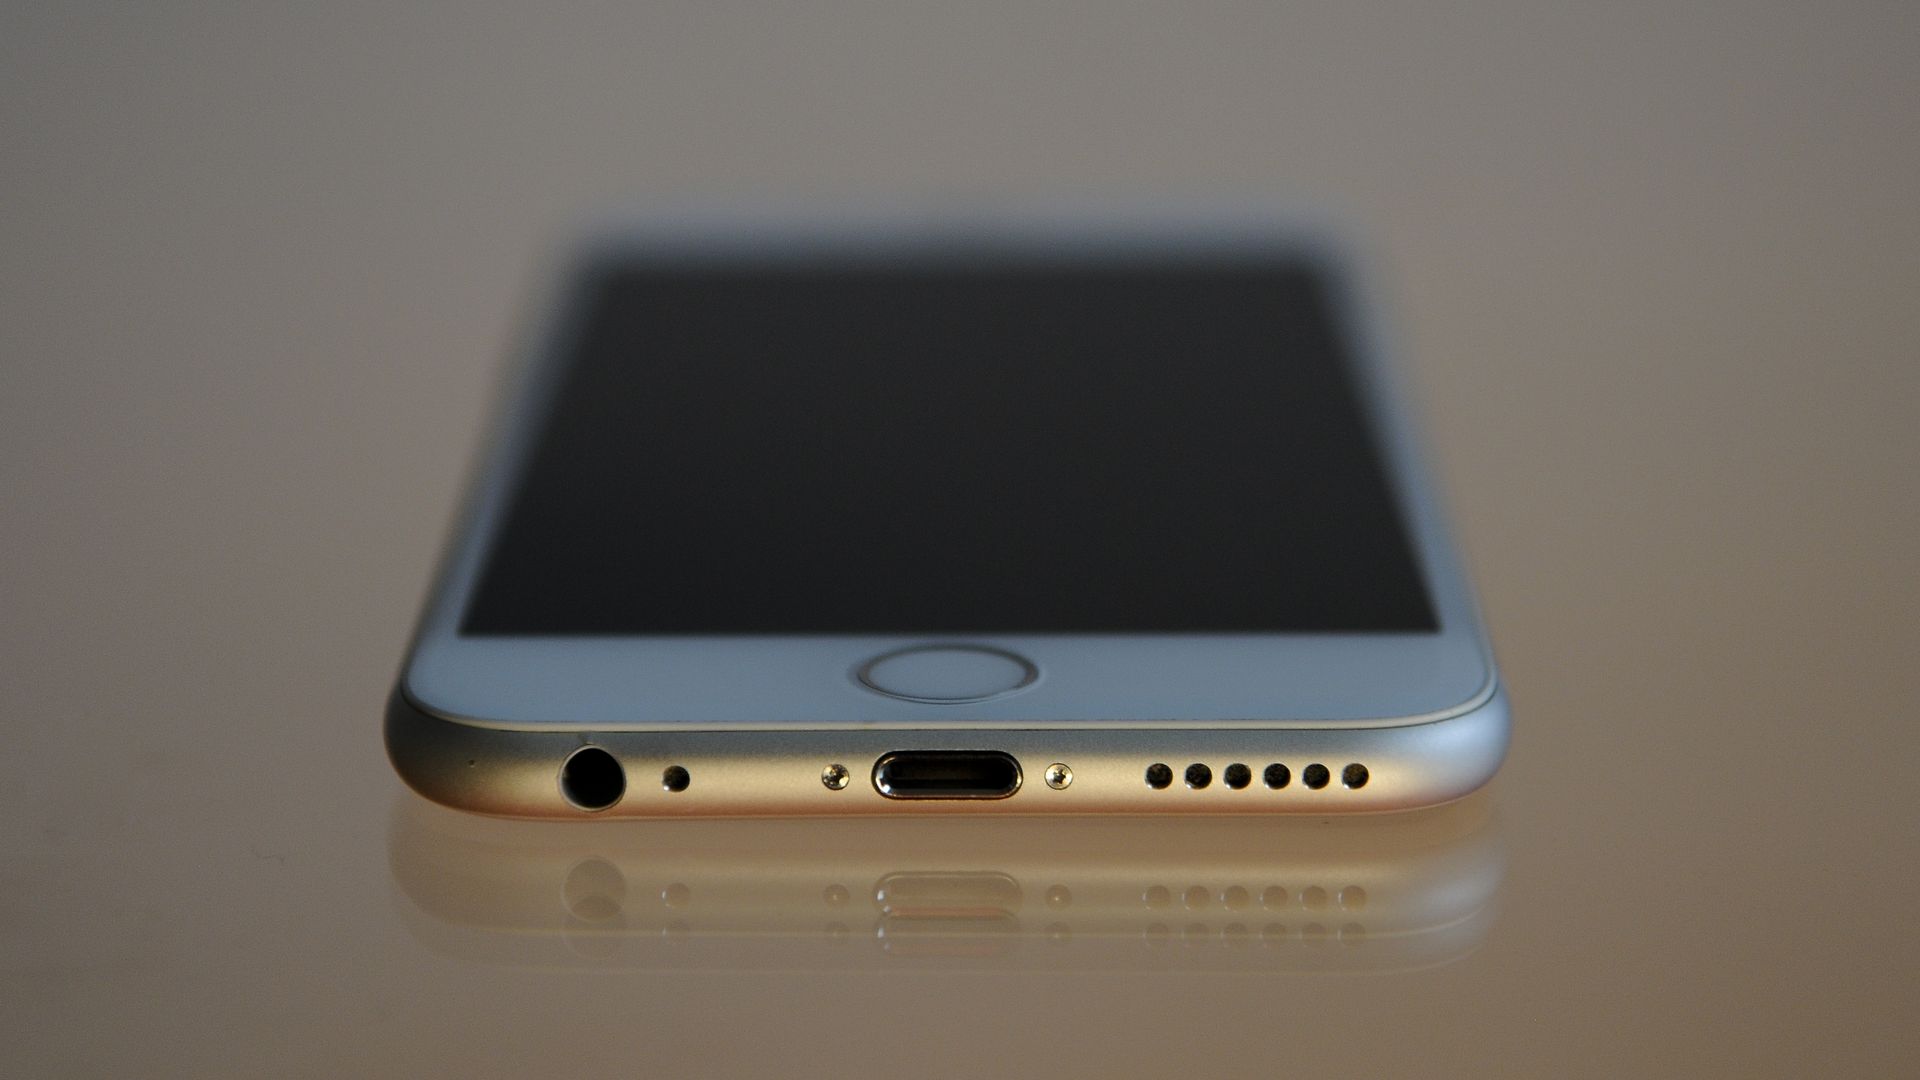 iPhone 6 viewed from the front edge